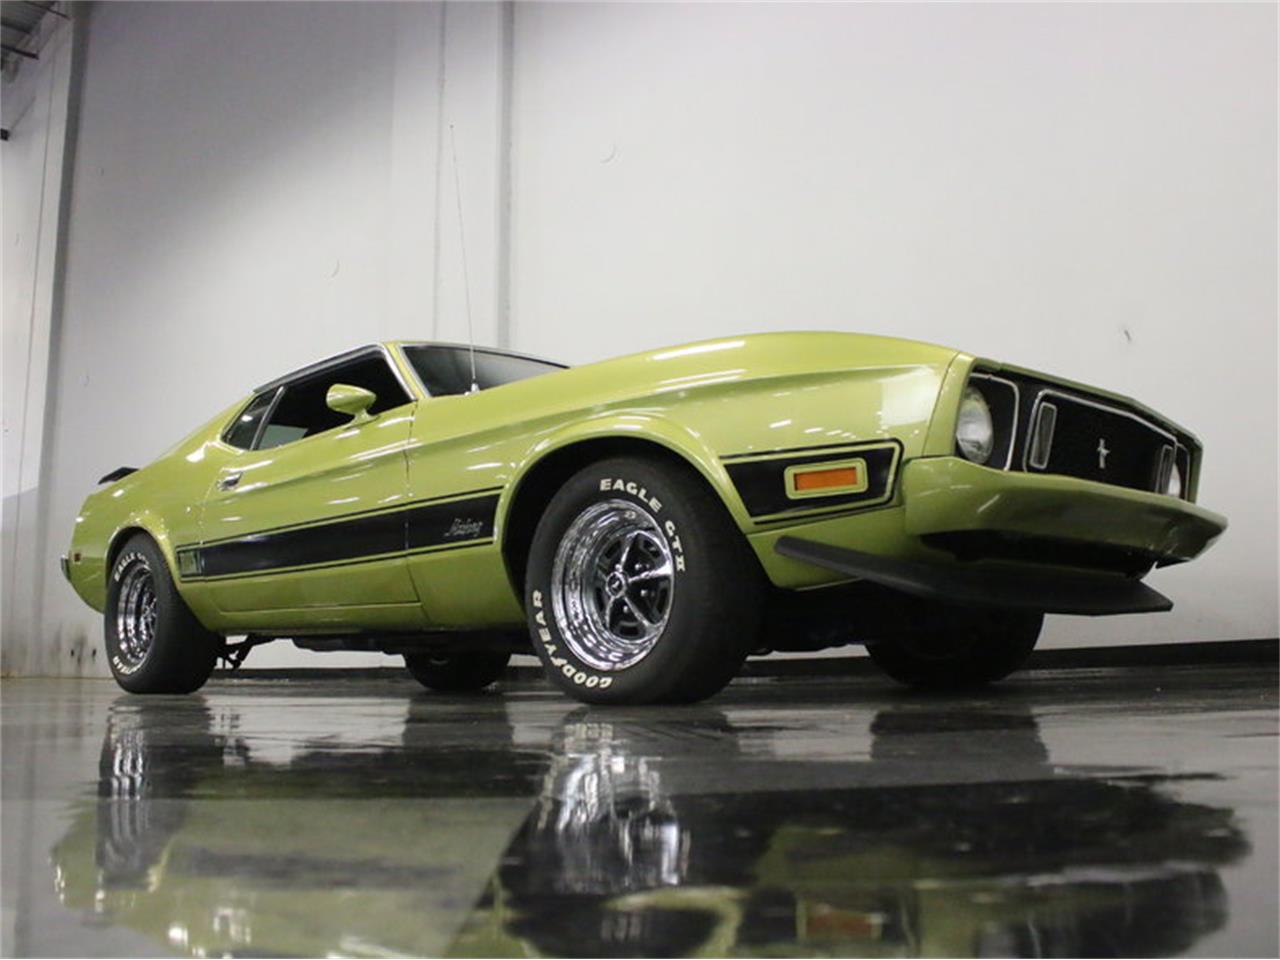 1973 Ford Mustang Mach 1 for Sale | ClassicCars.com | CC-982874